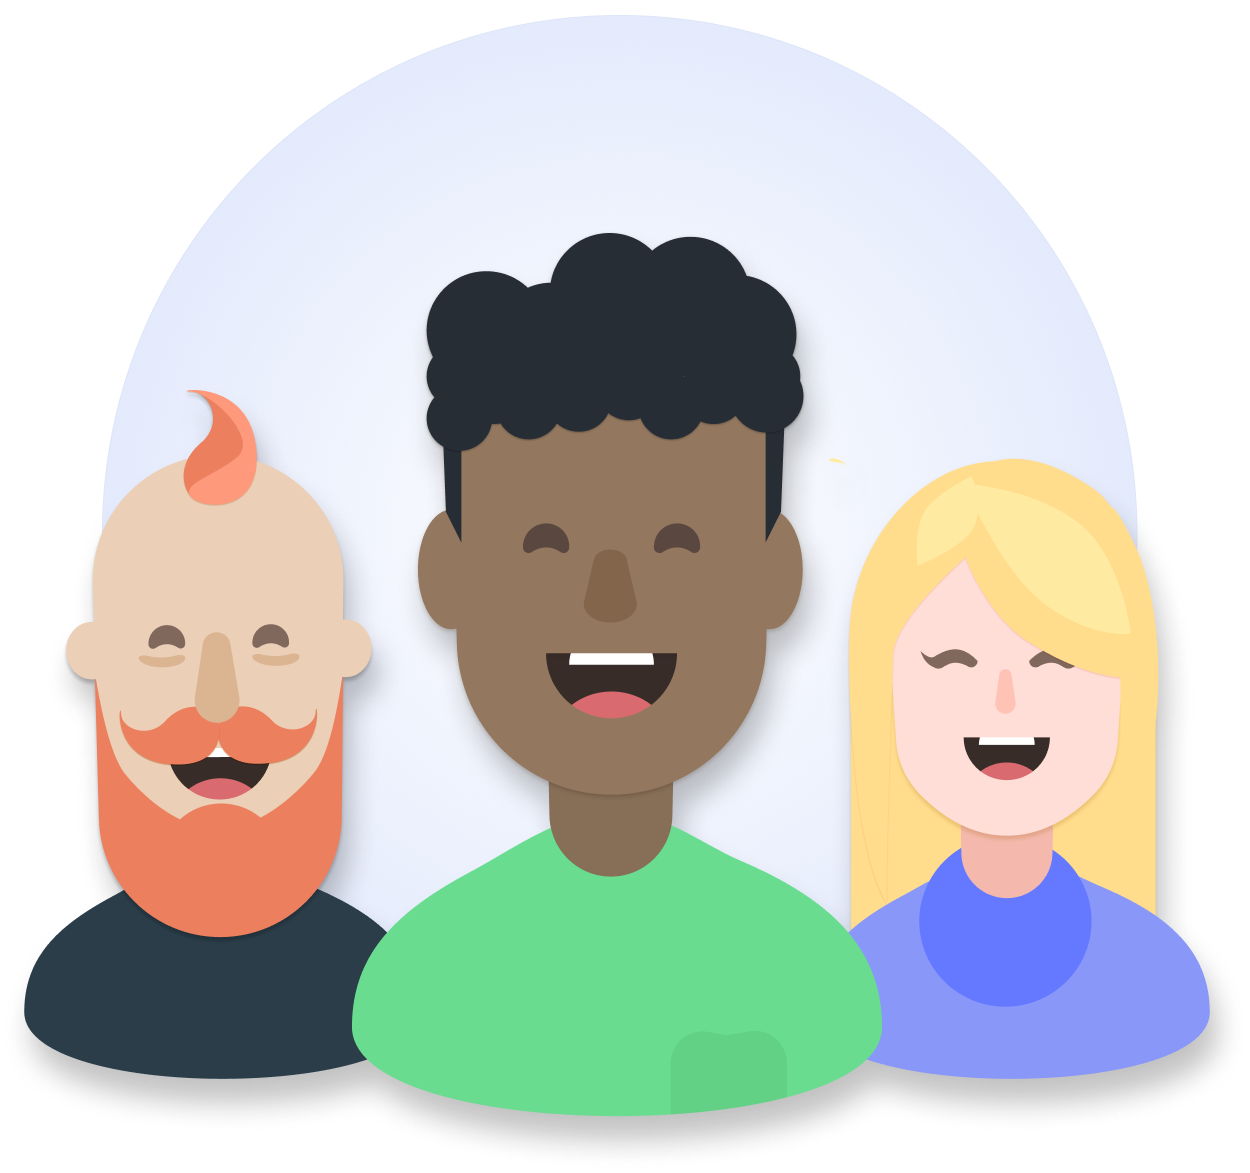 illustration of 3 diverse people within a circle